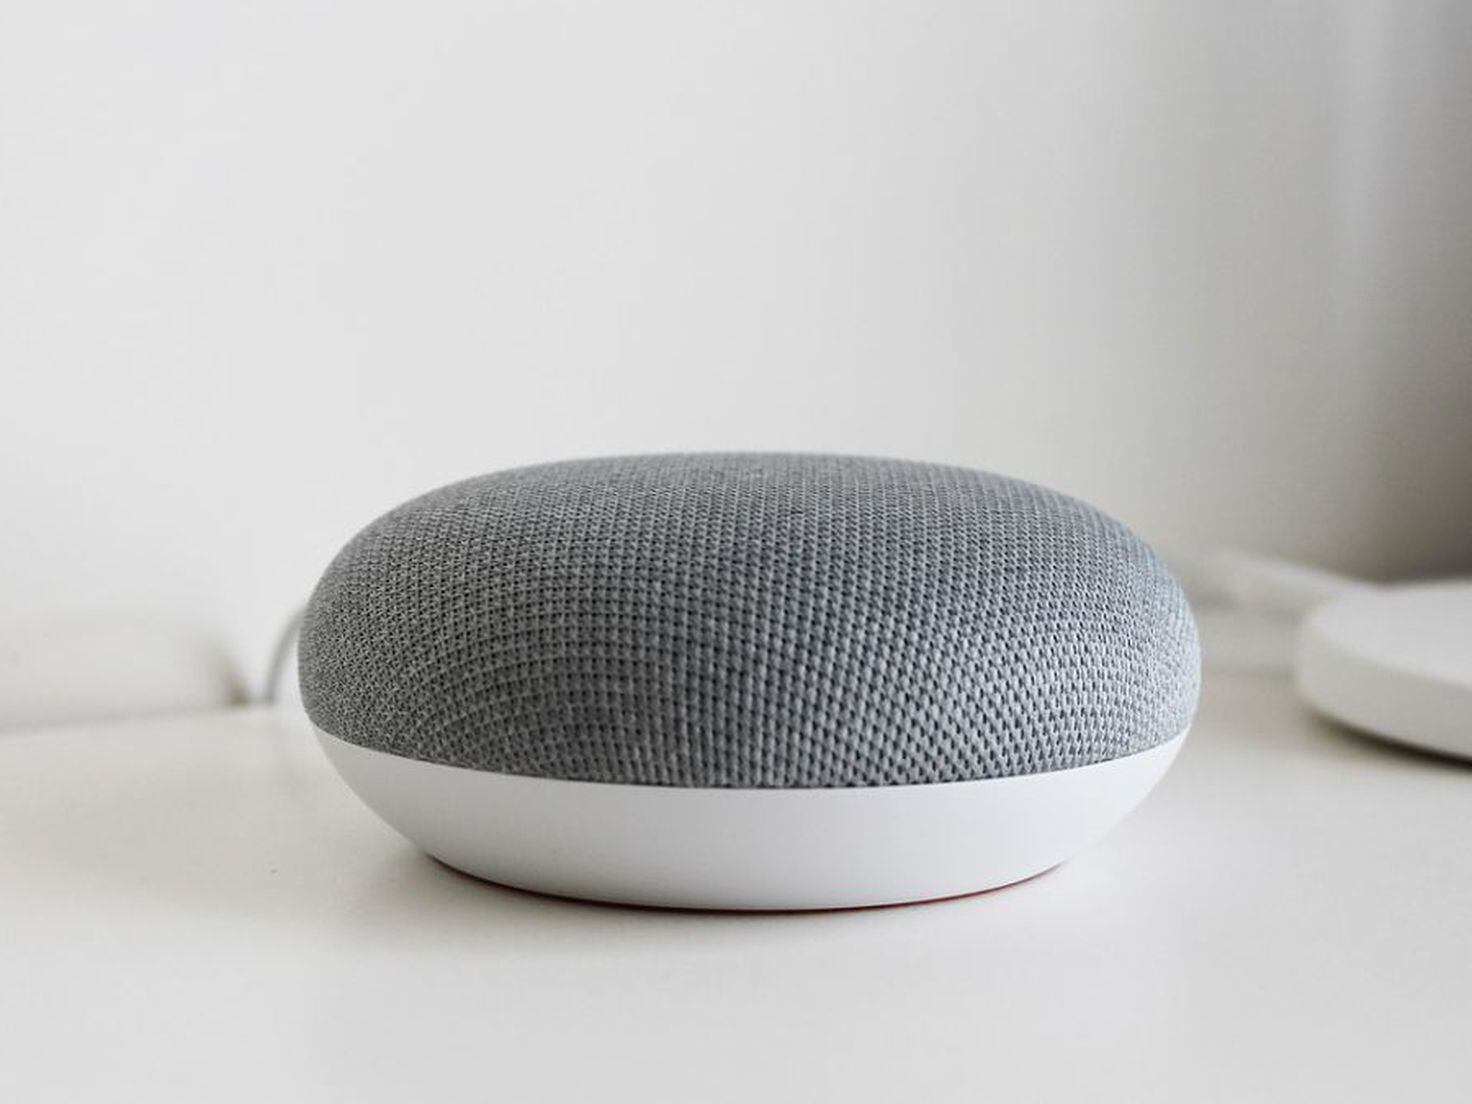 How Do I Reconnect My Google Home To Wi-Fi?